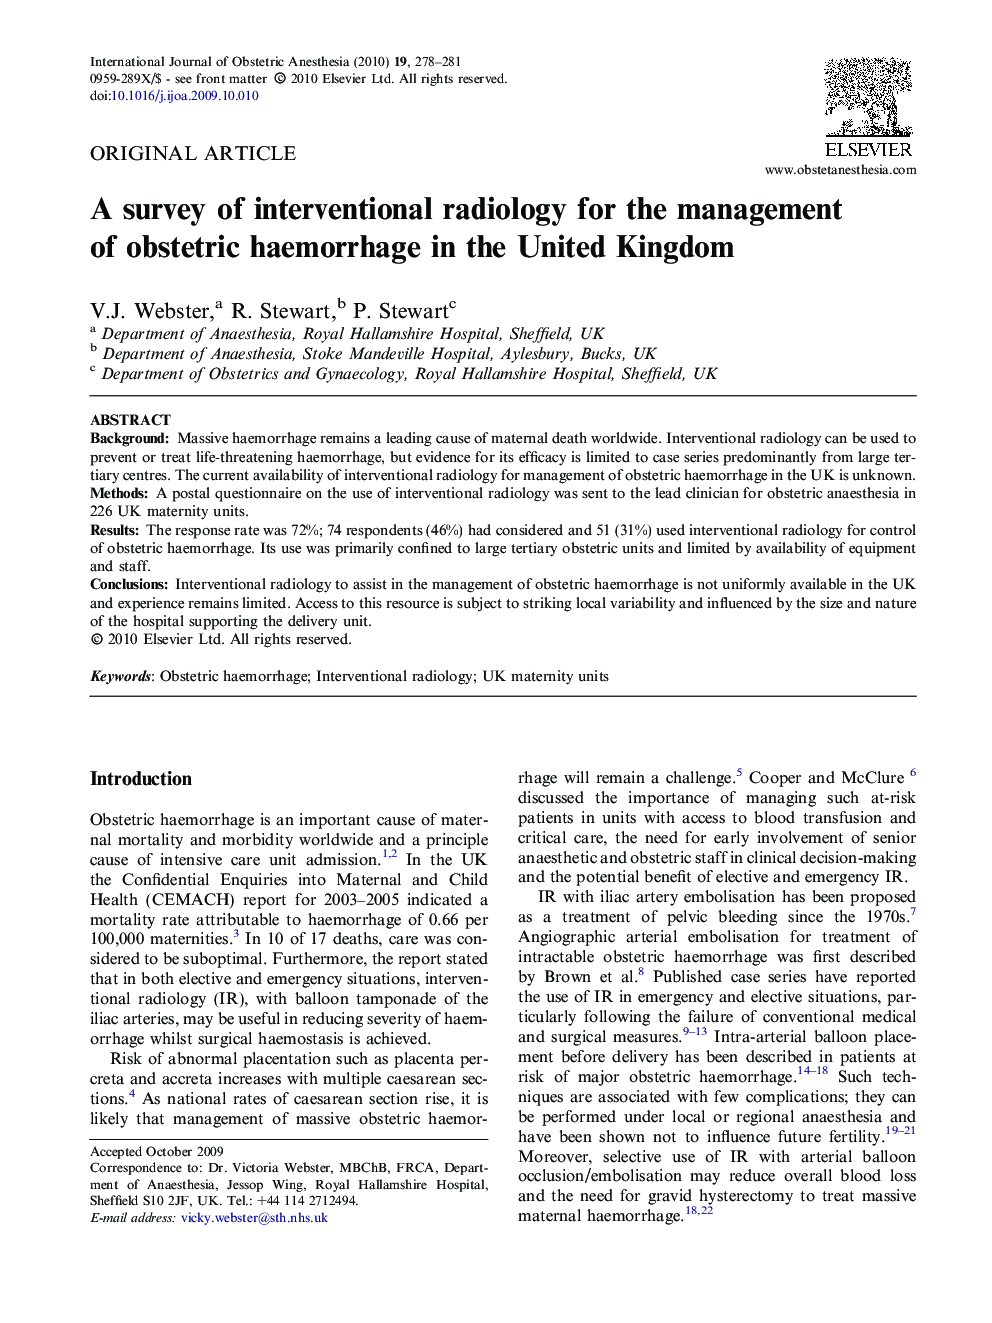 A survey of interventional radiology for the management of obstetric haemorrhage in the United Kingdom